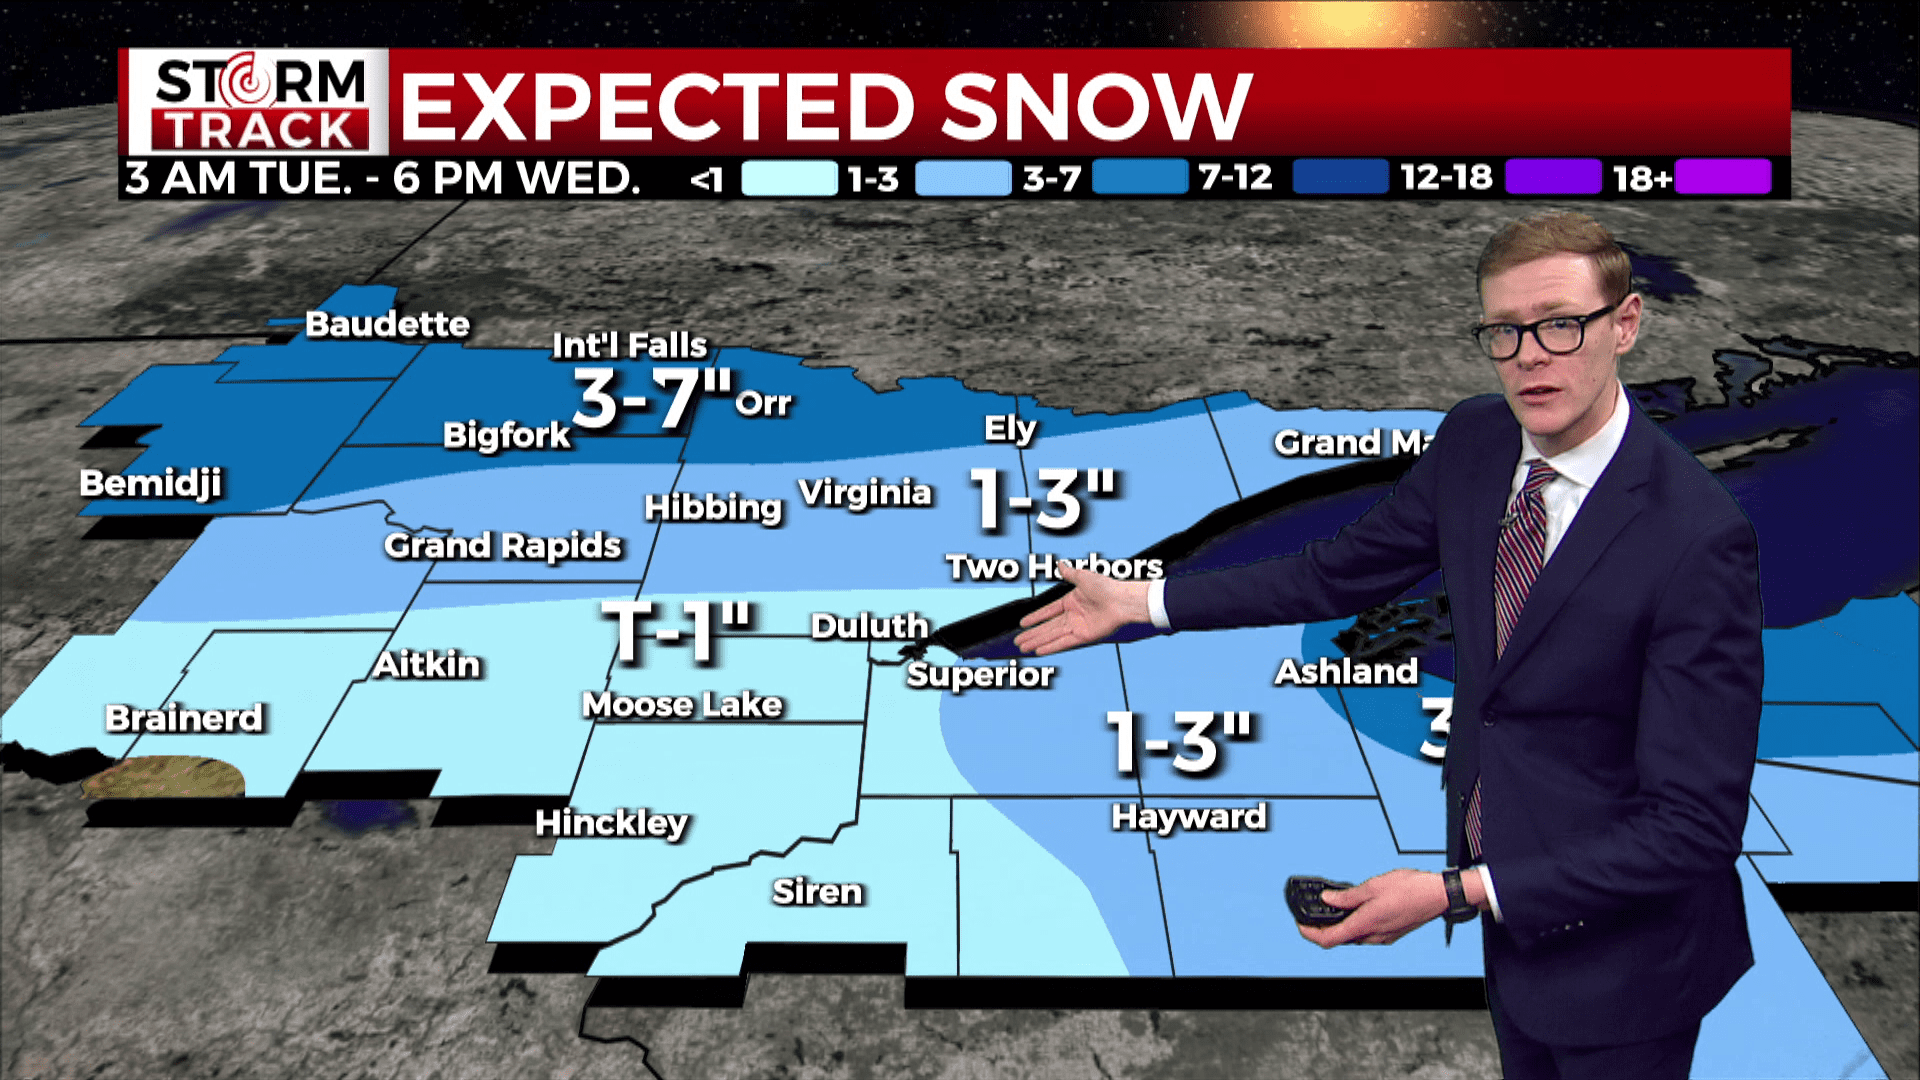 Brandon showing expected snow totals